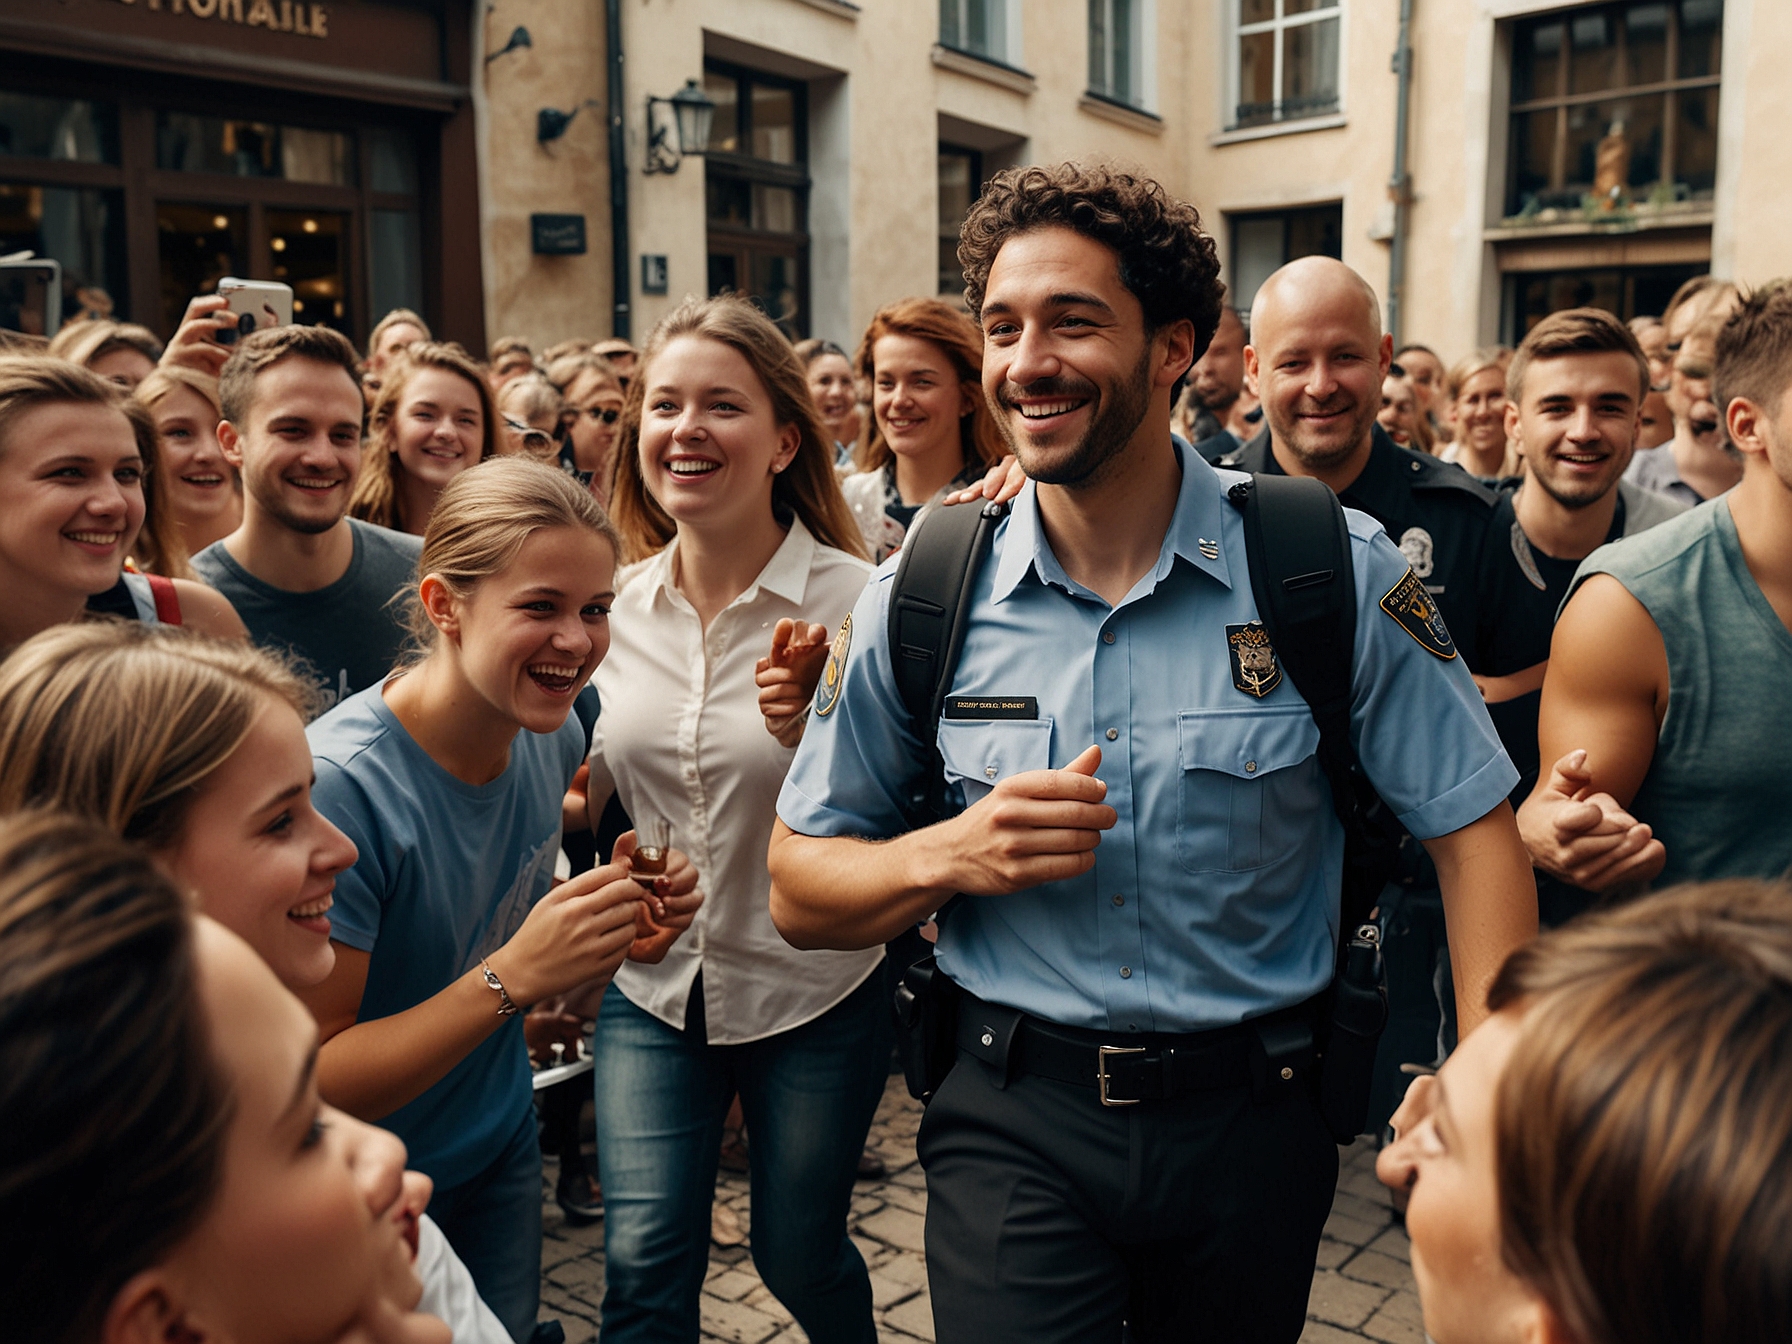 Jude Bellingham being escorted by police through a crowd of eager fans outside a restaurant in Erfurt, Germany, showcasing the football star's popularity and the intense adoration from his supporters.